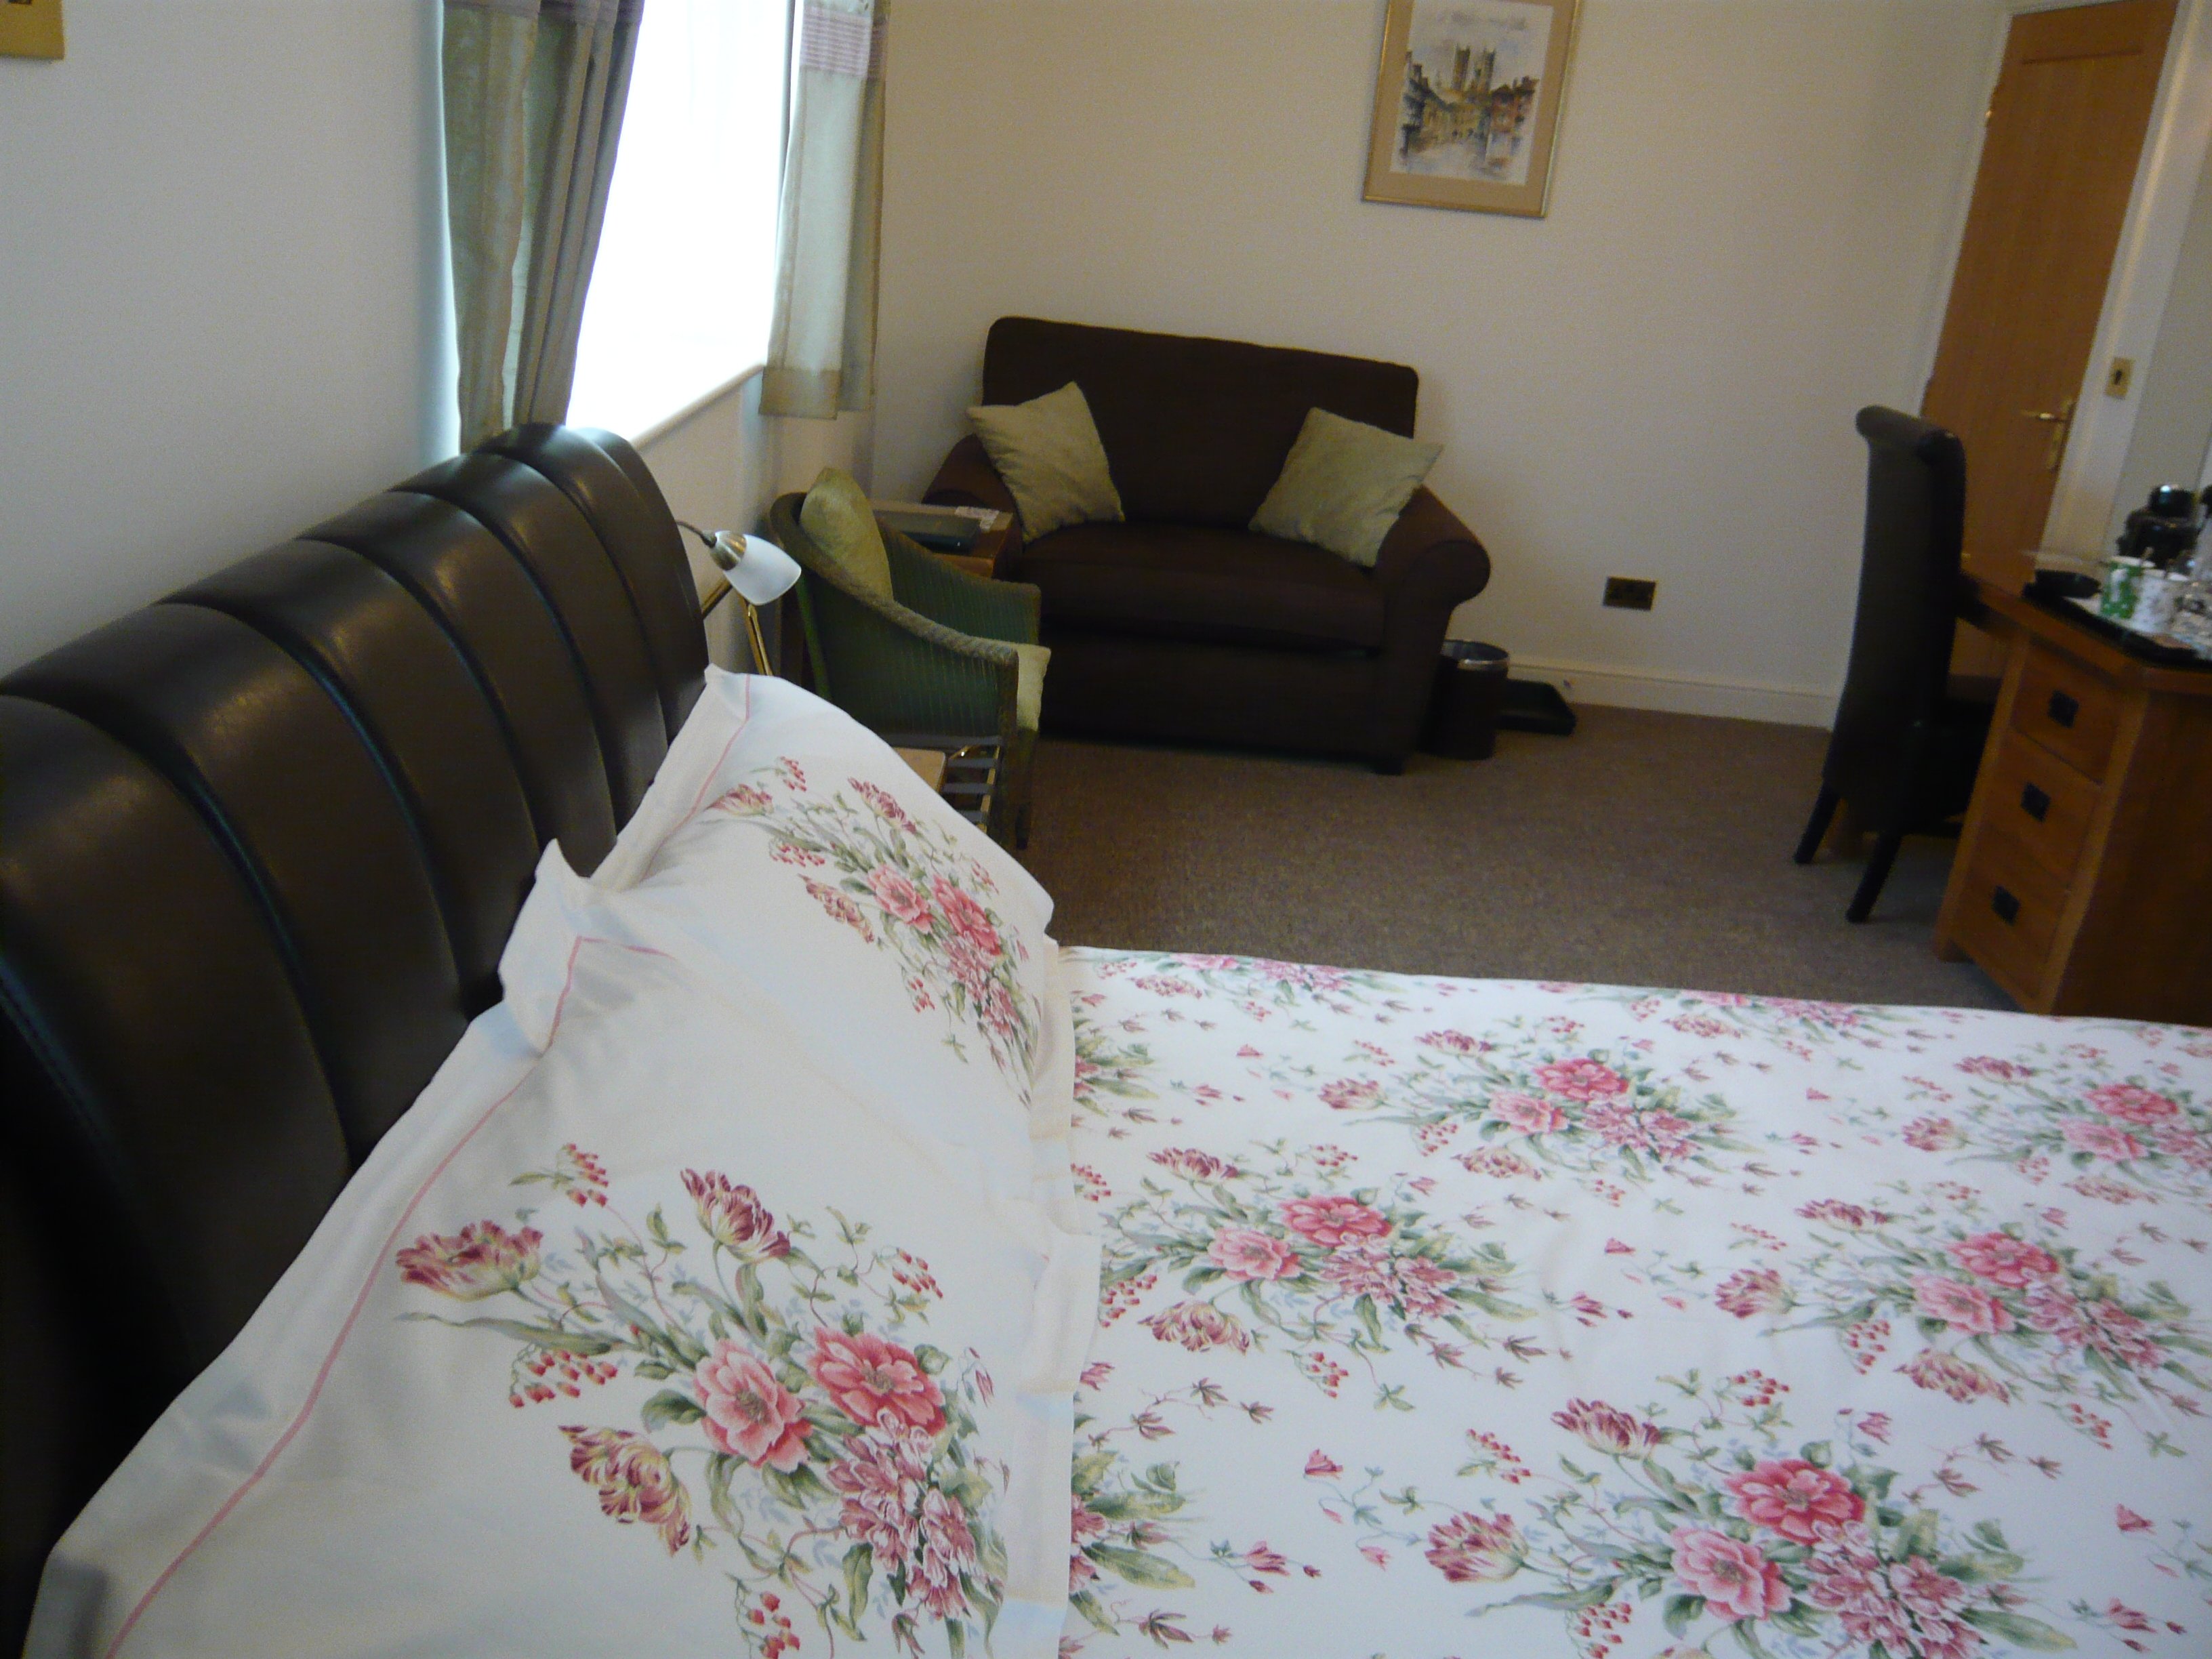 suite 1 double bedroom with sofa bed Redhouse Farm Bed & Breakfast, Lincolnshire